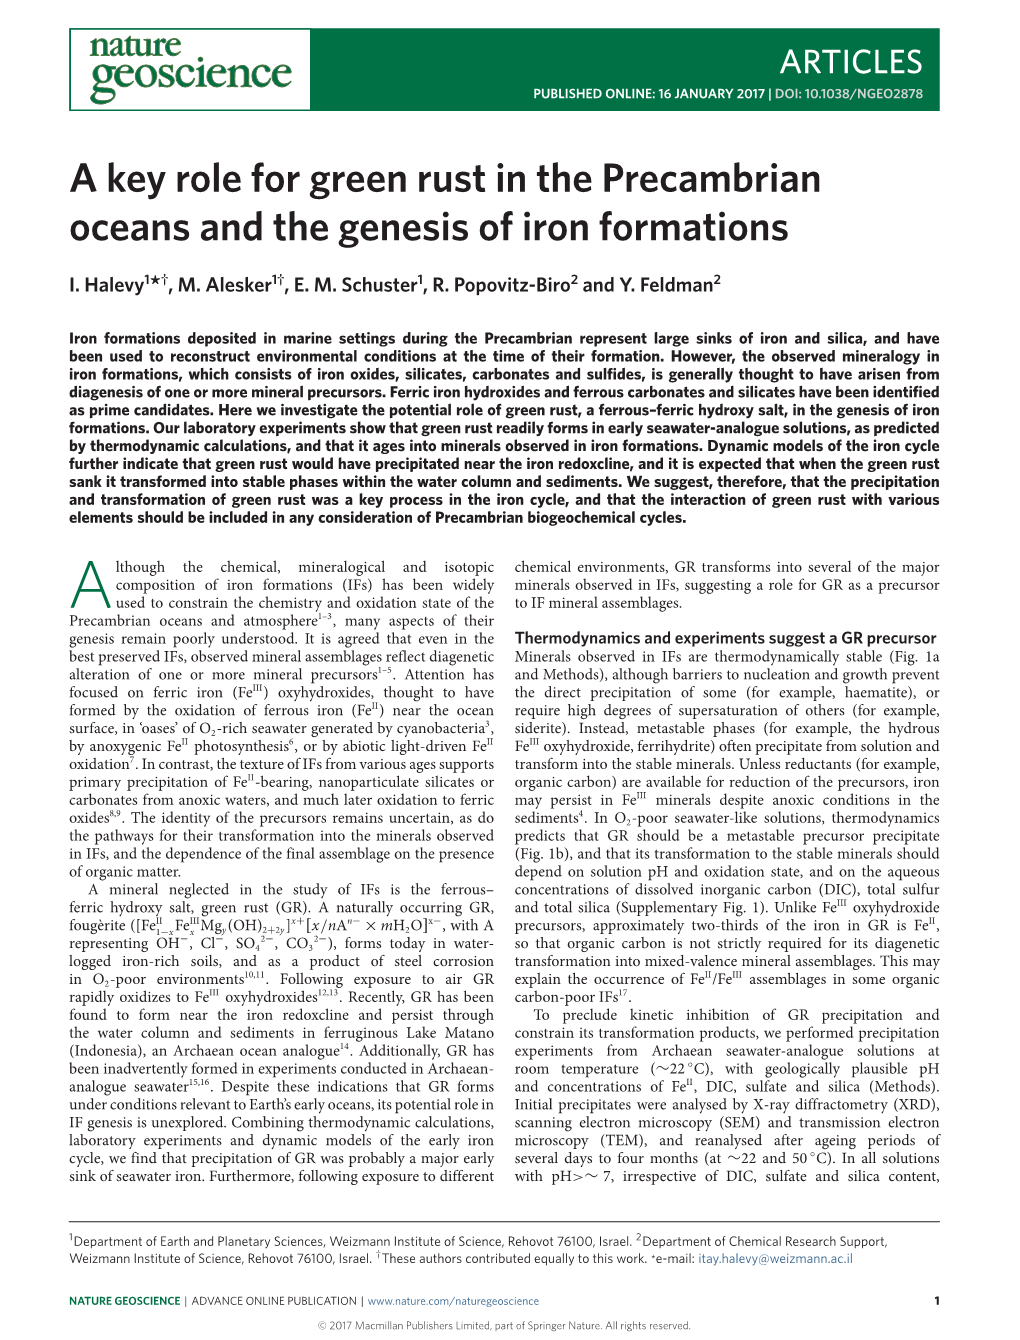 A Key Role for Green Rust in the Precambrian Oceans and the Genesis of Iron Formations